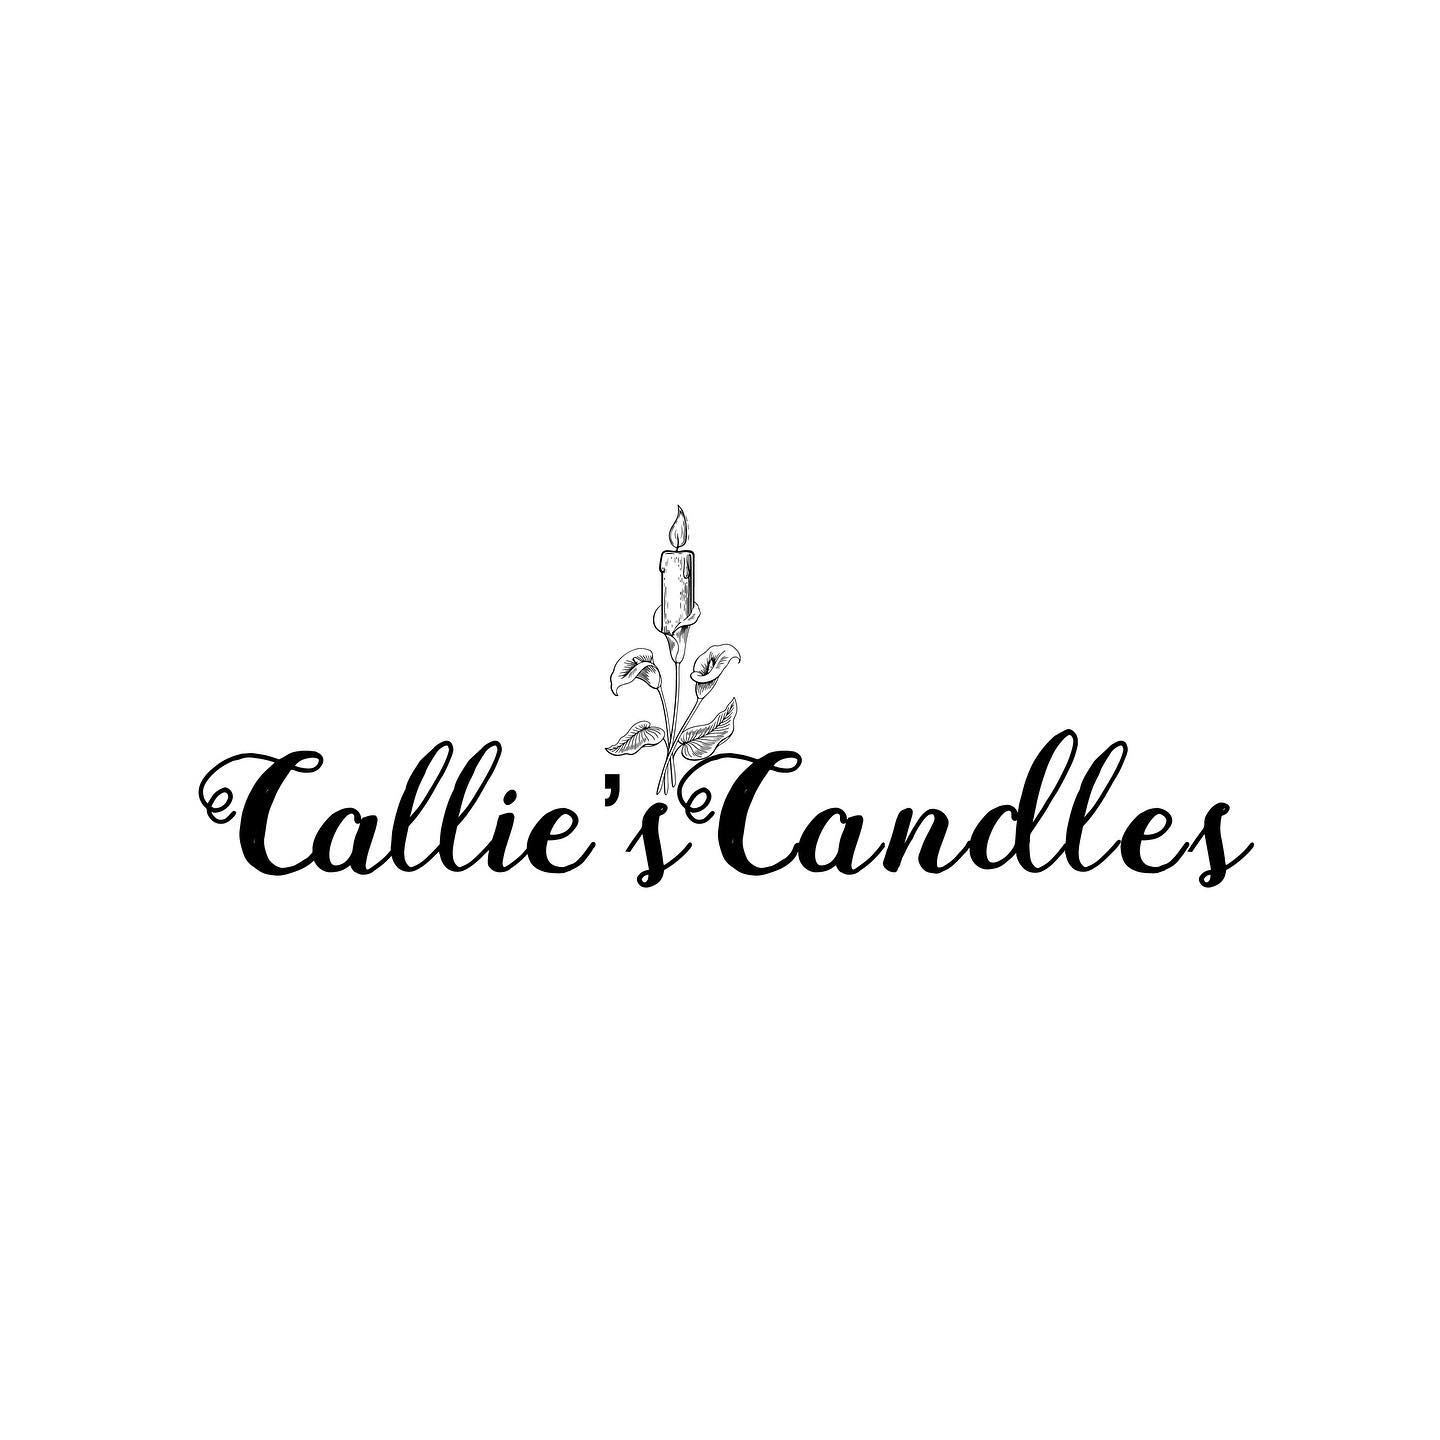 Creating A Relaxing Ambiance - Callie's Candles